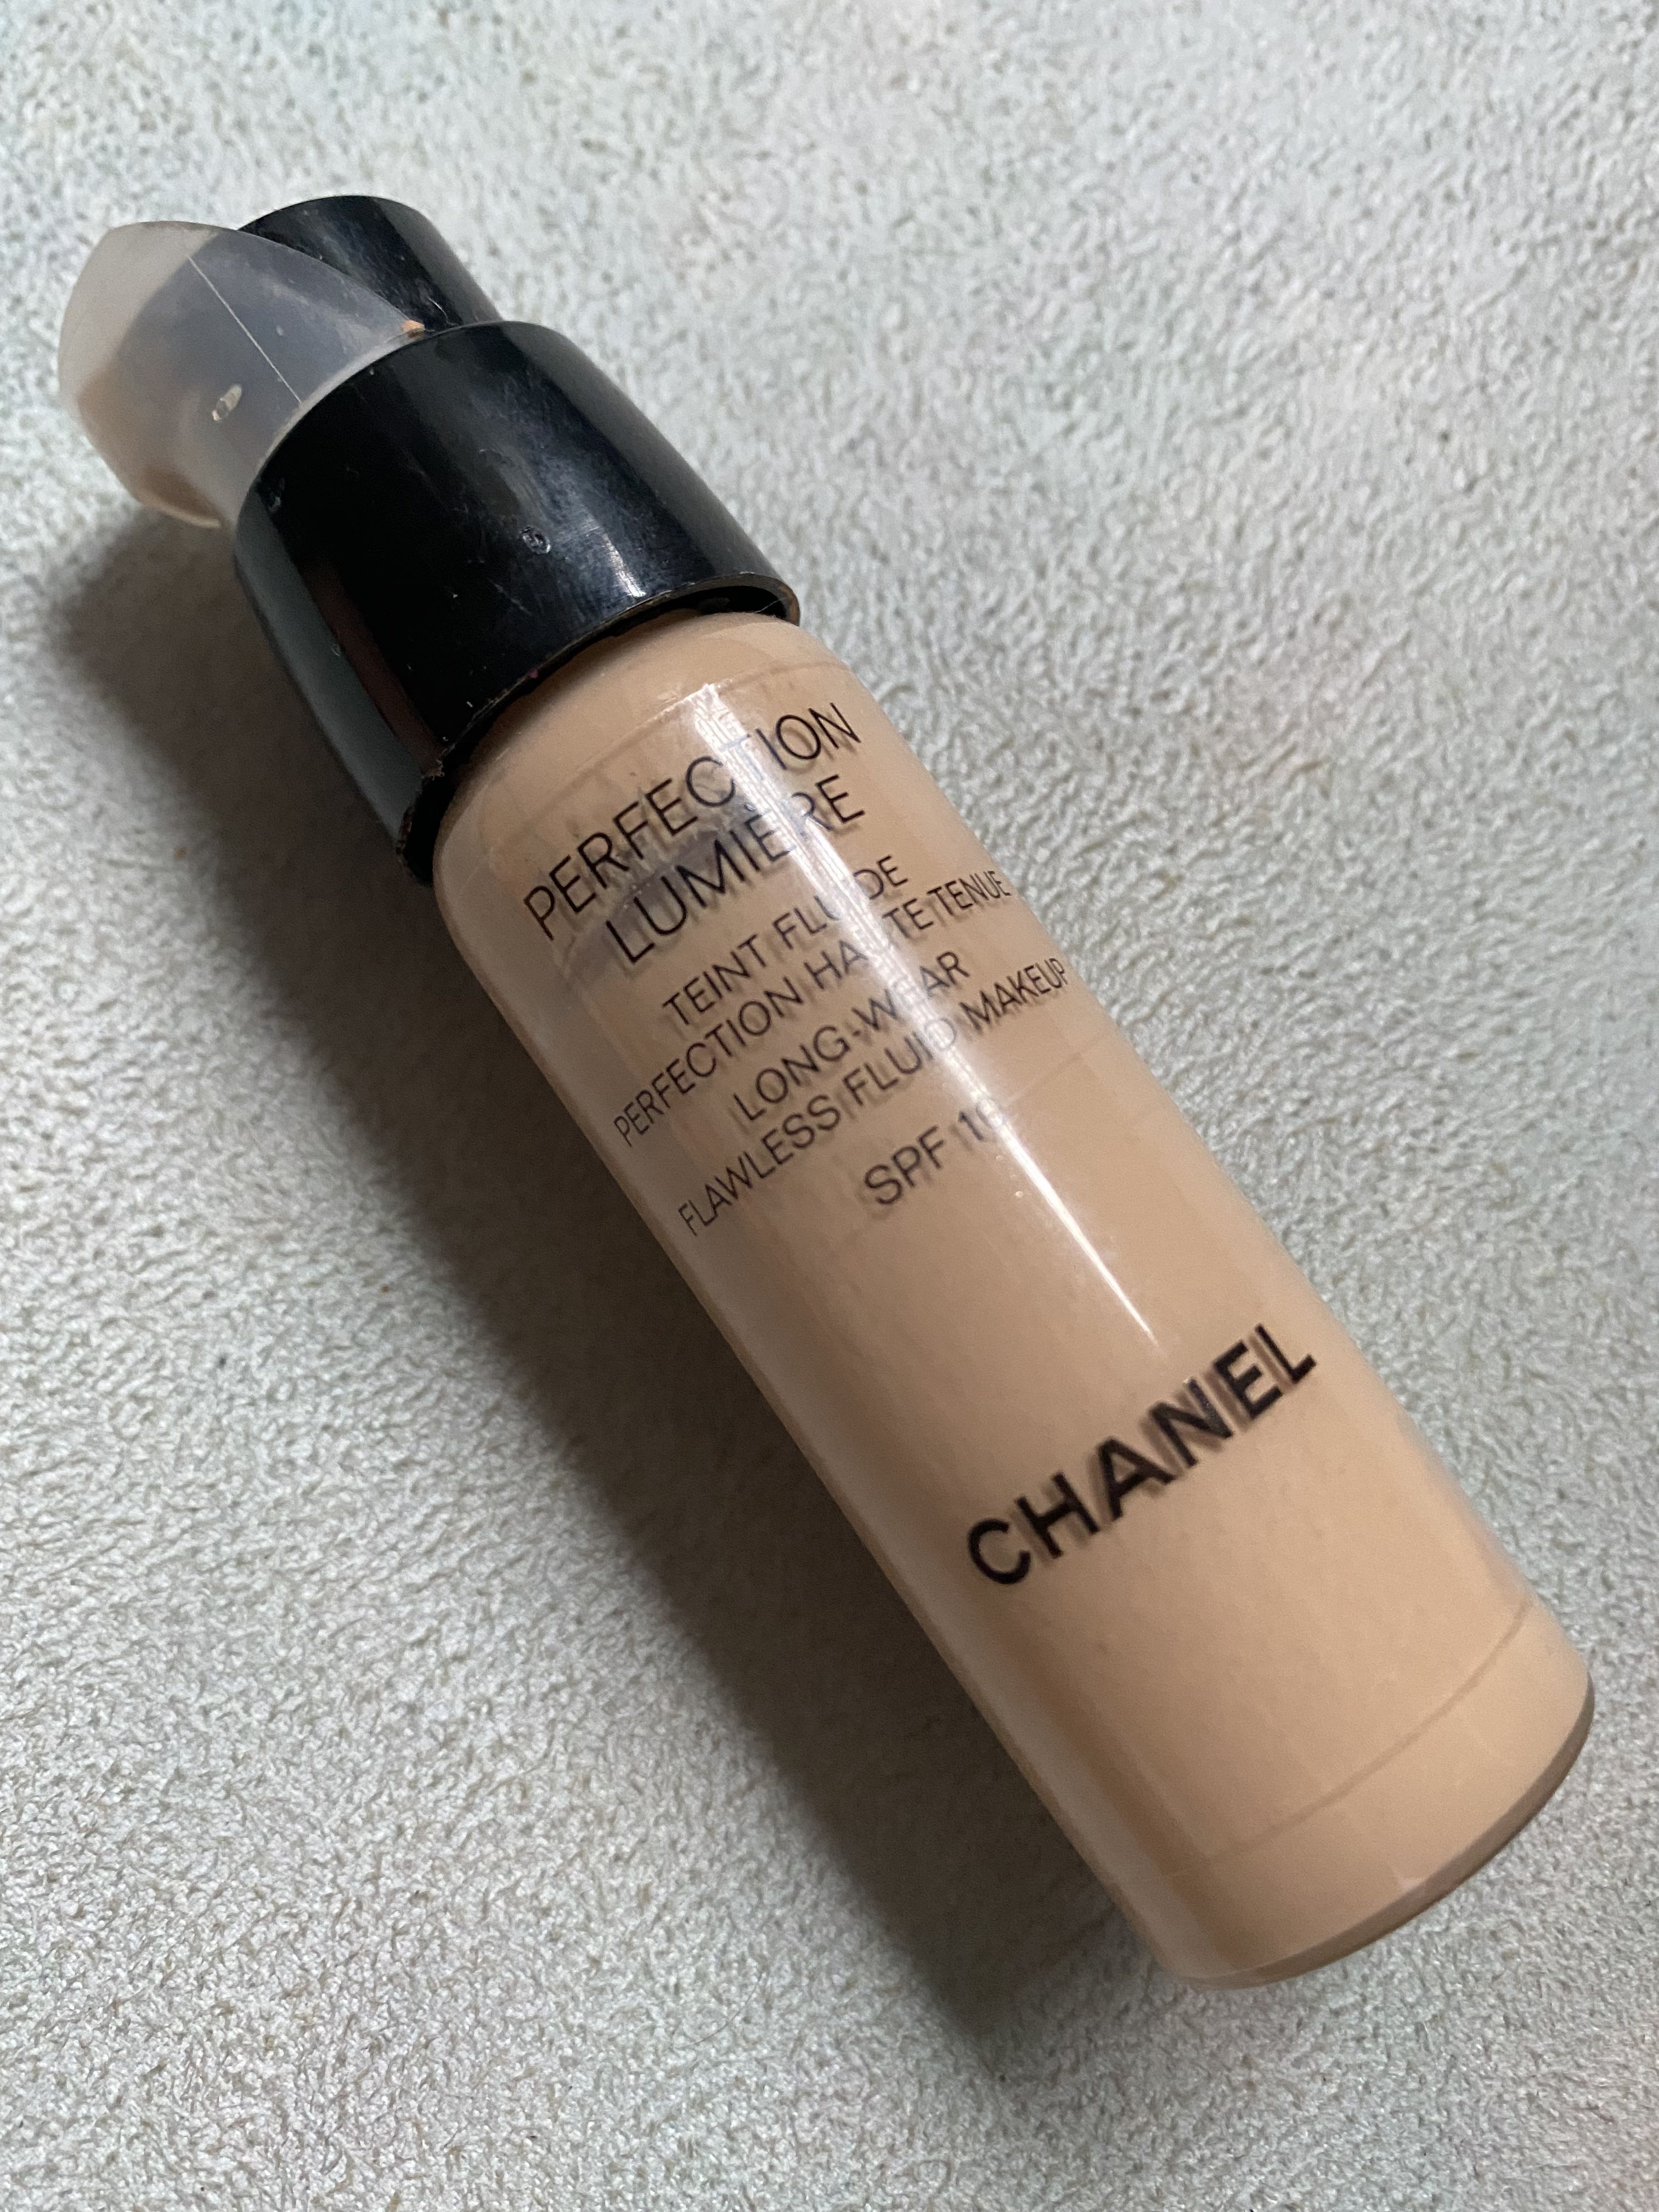 Chanel Perfection Lumière Long-Wearing Flawless Fluid Makeup SPF 10